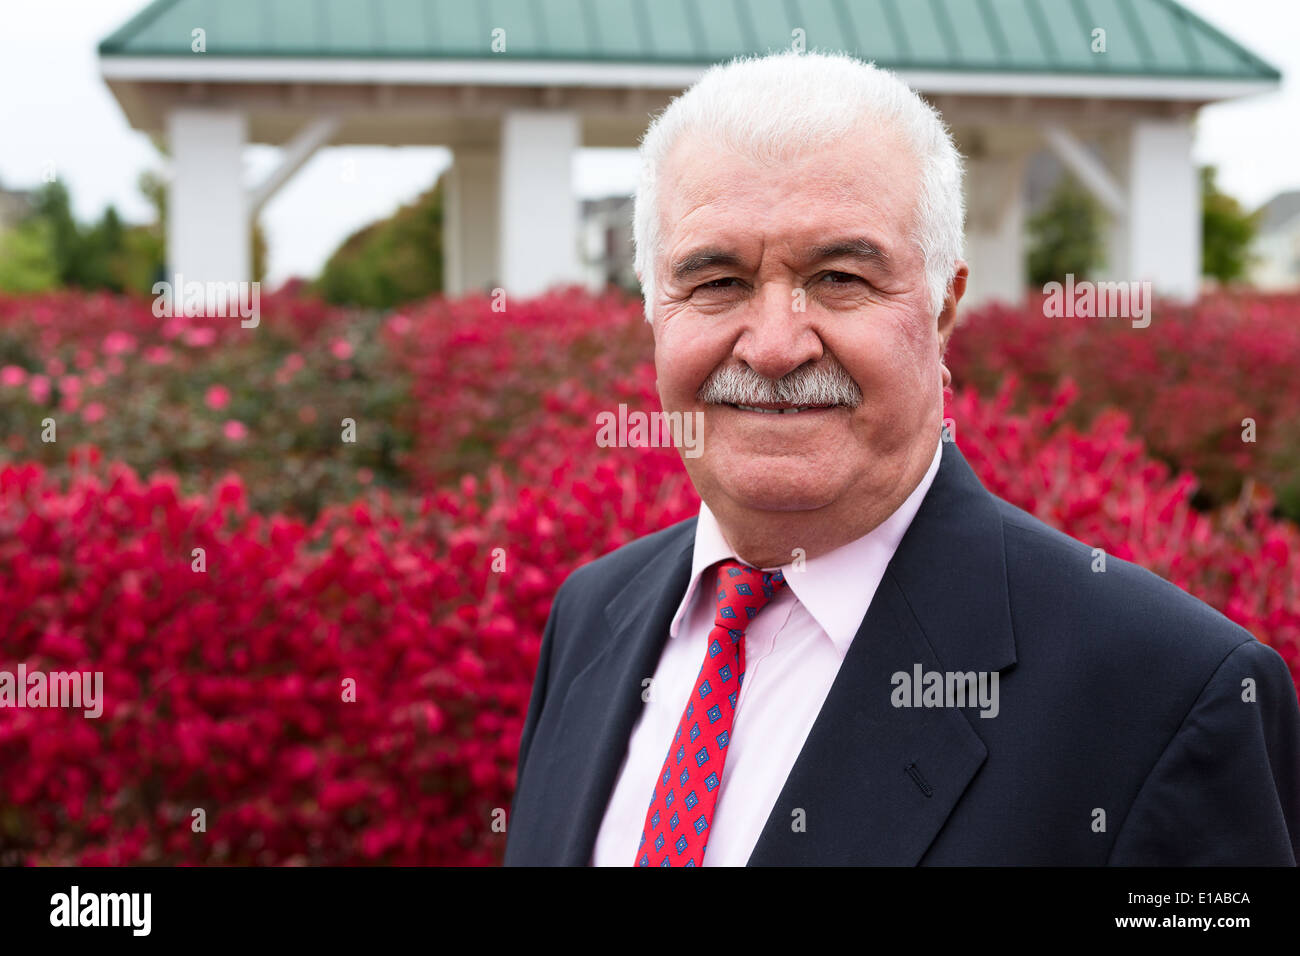 White hair Senior Businessman outside by the red burning bushes Stock Photo